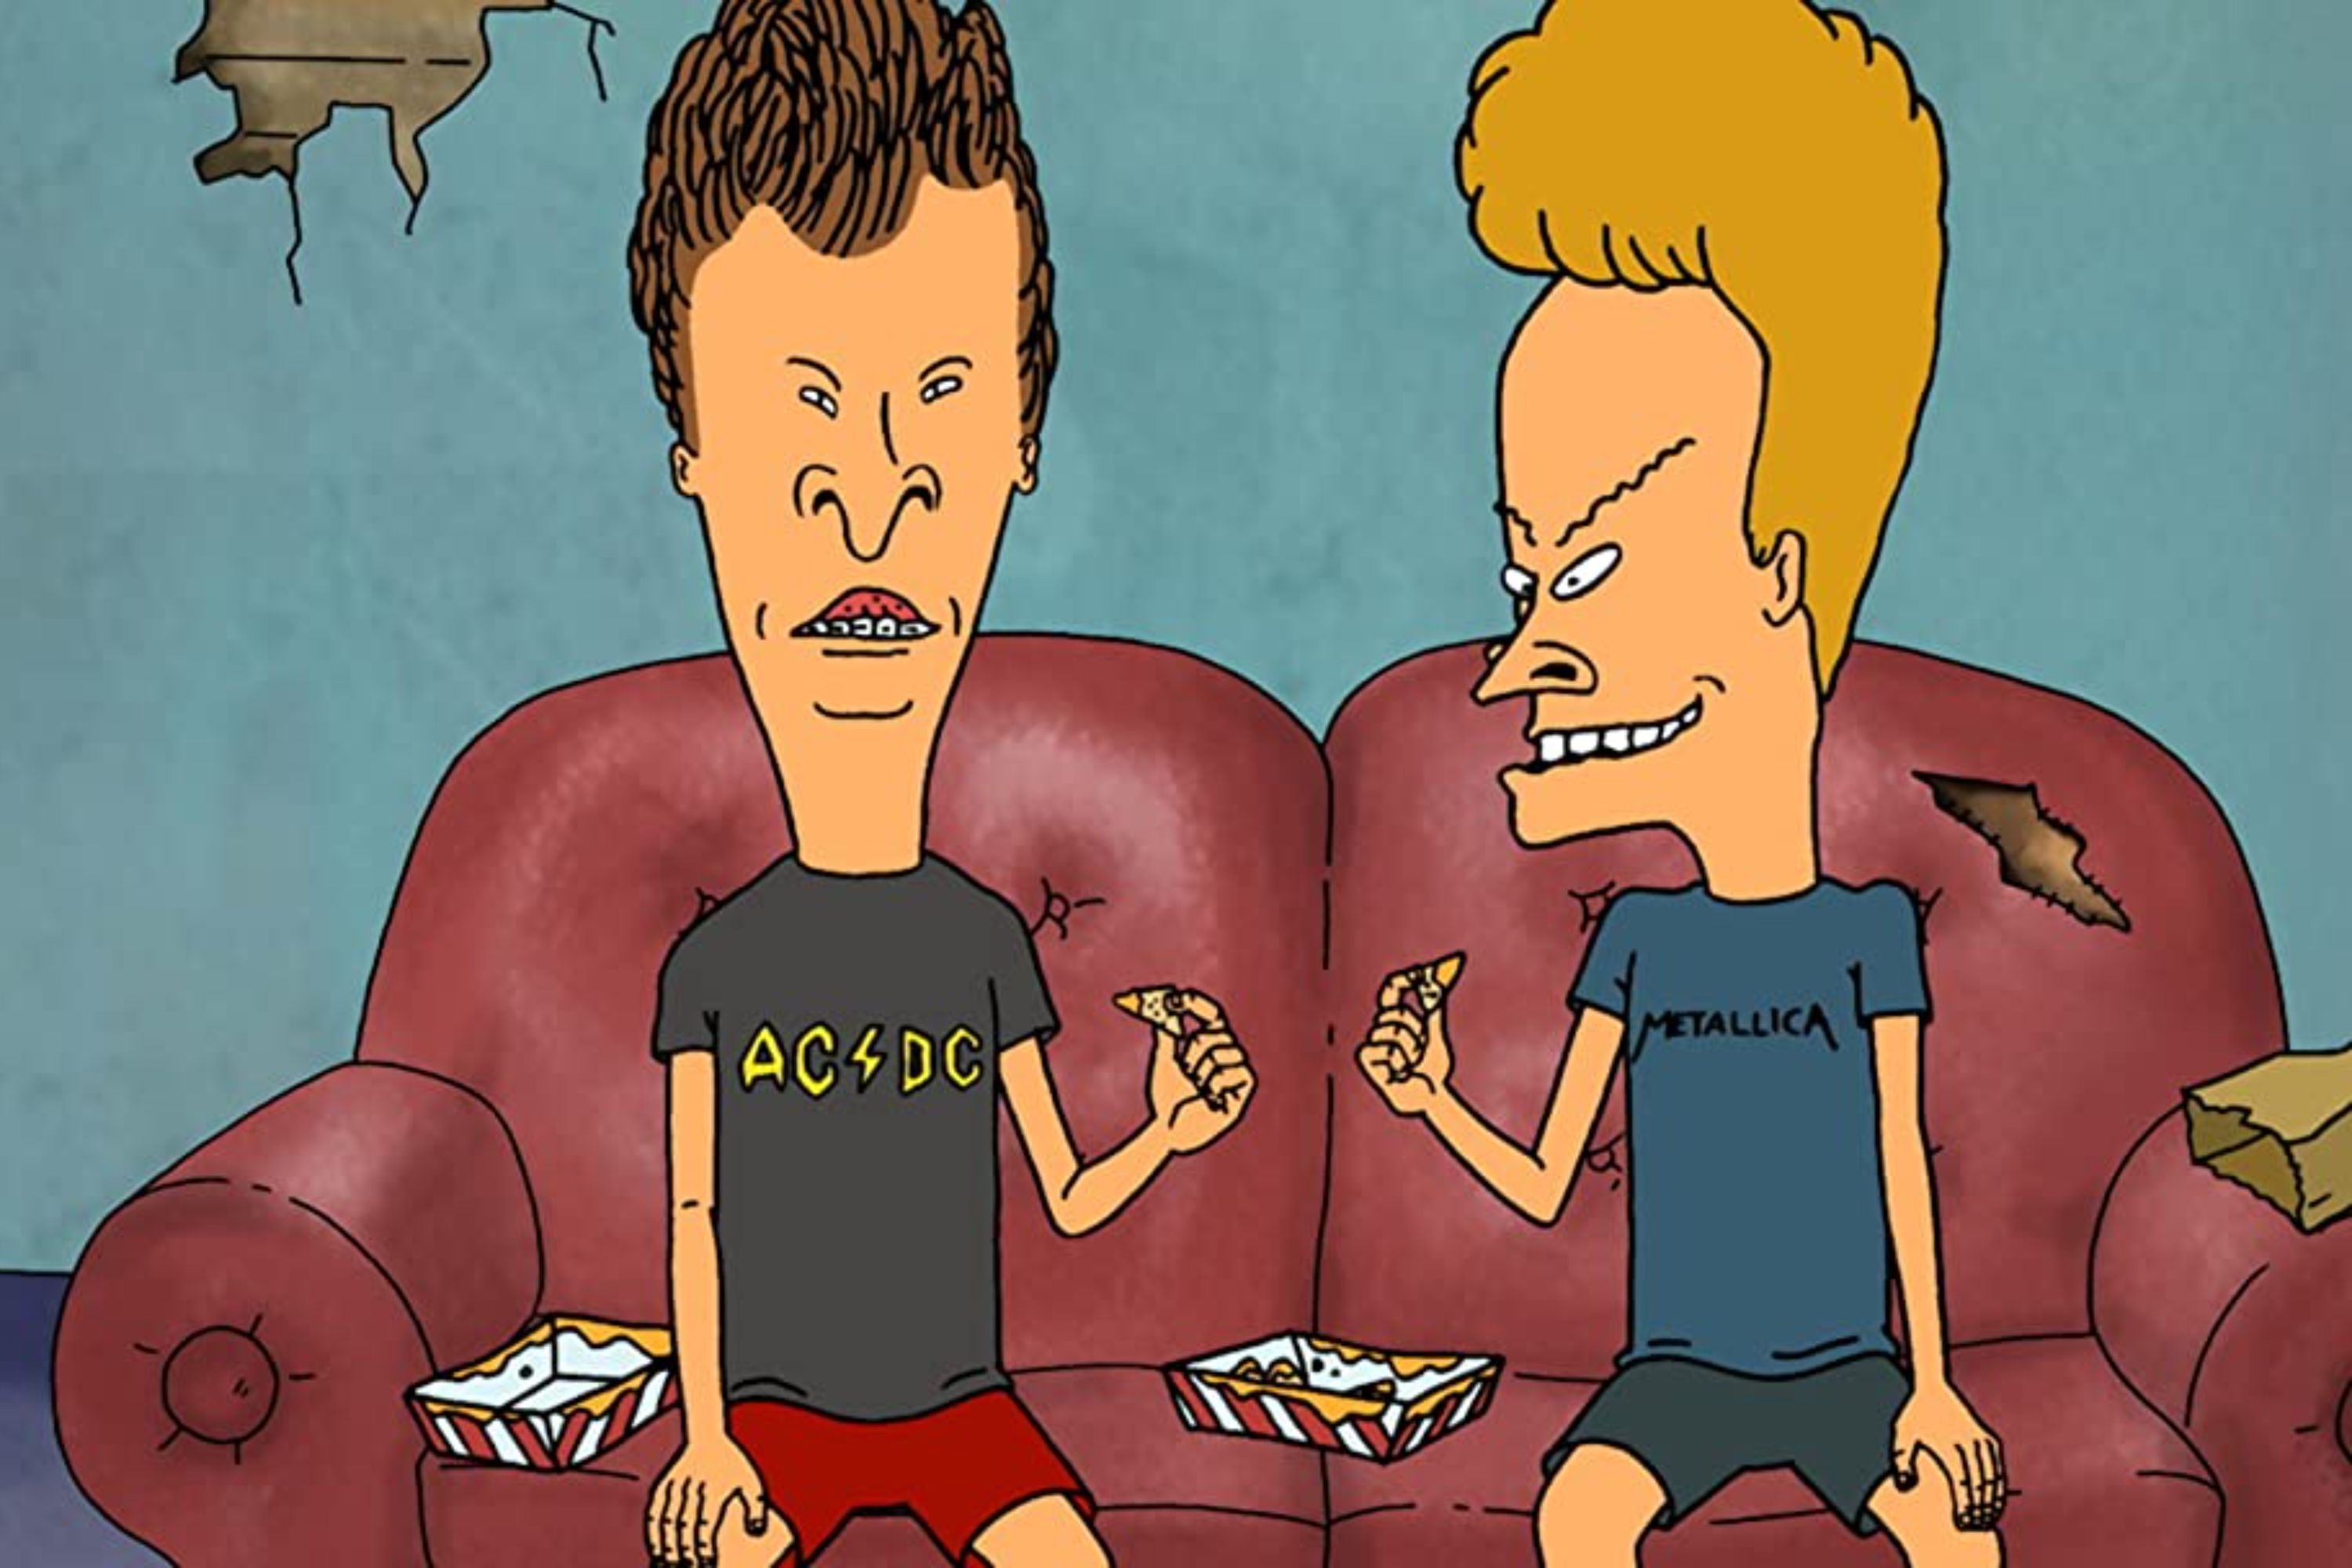 Beavis and Butthead sitting on a red couch.